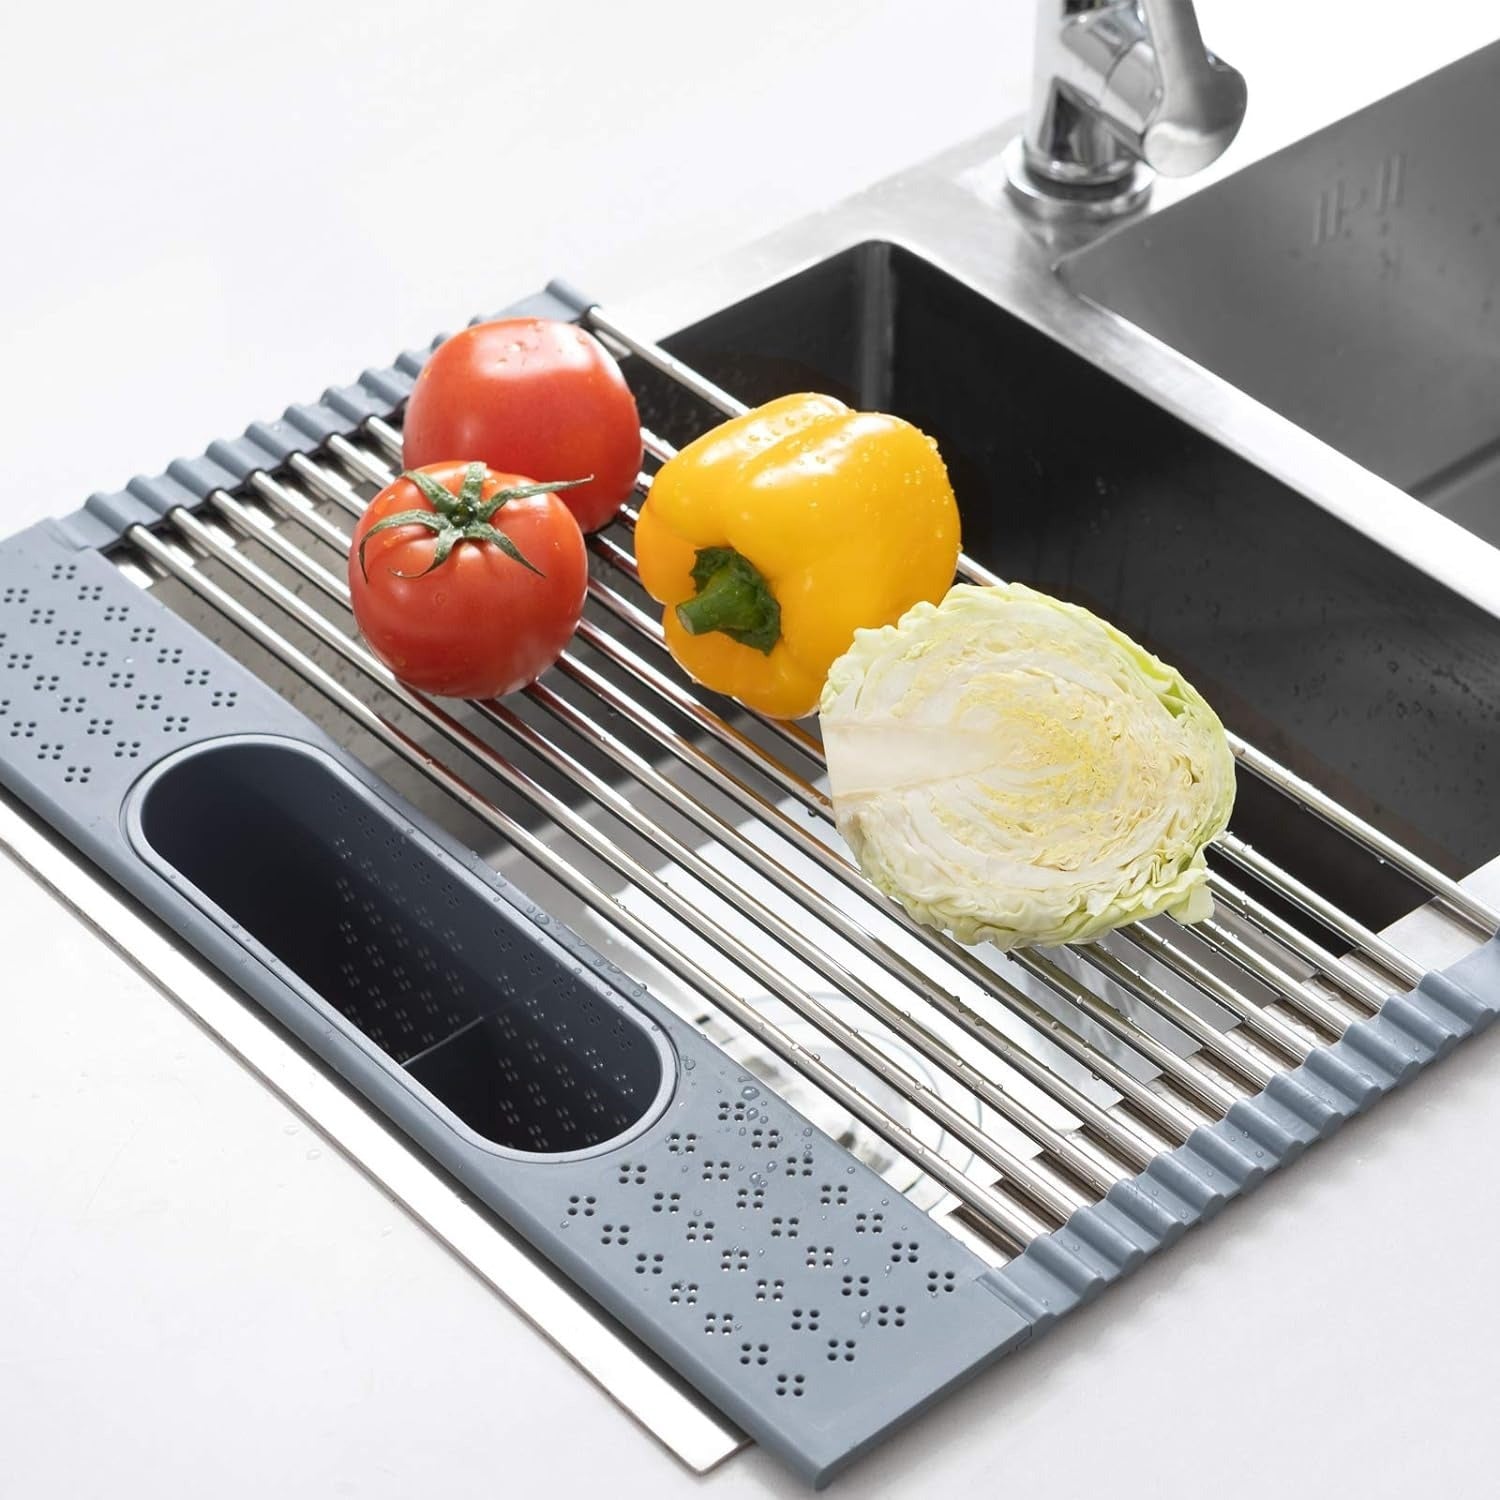 Dish Drainer With Vegetables.